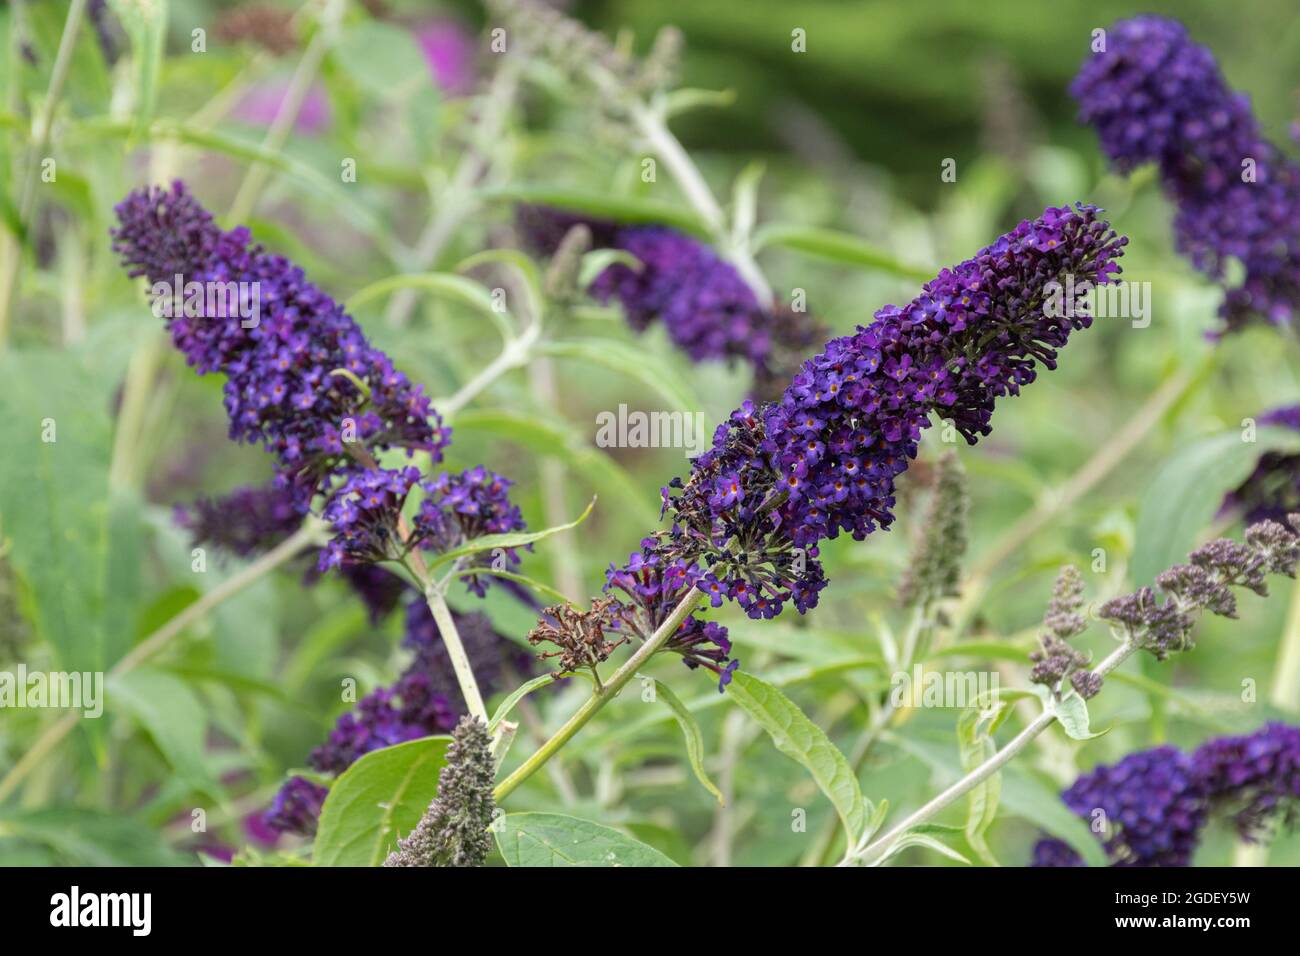 Buddleja davidii Black Knight (buddleia variety), known as a butterfly bush, in flower during august or summer, UK Stock Photo